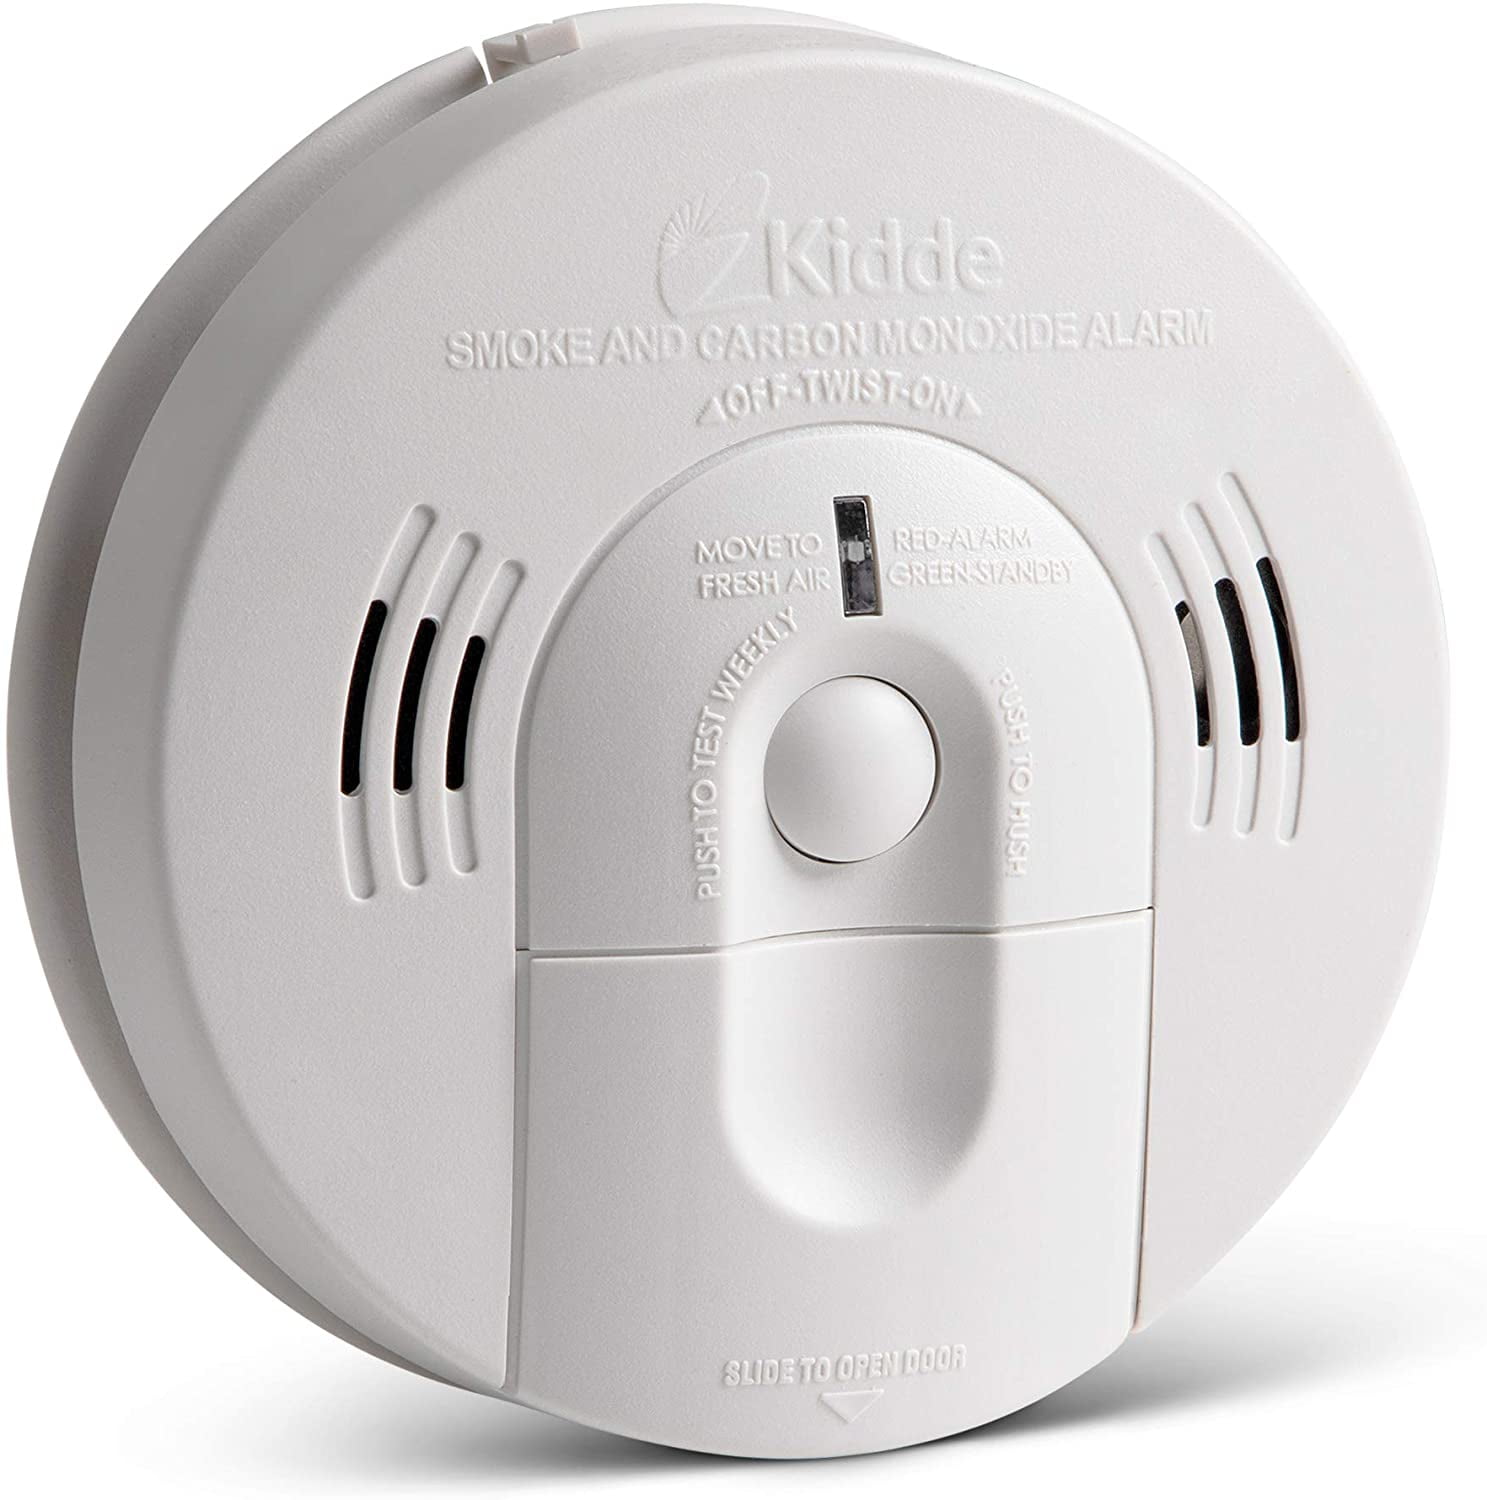 Hardwired w/10 Year Lithium Battery Backup 2 Pack Kidde Smoke and Carbon Monoxide Detector Alarm with Voice Warning Interconnectable White